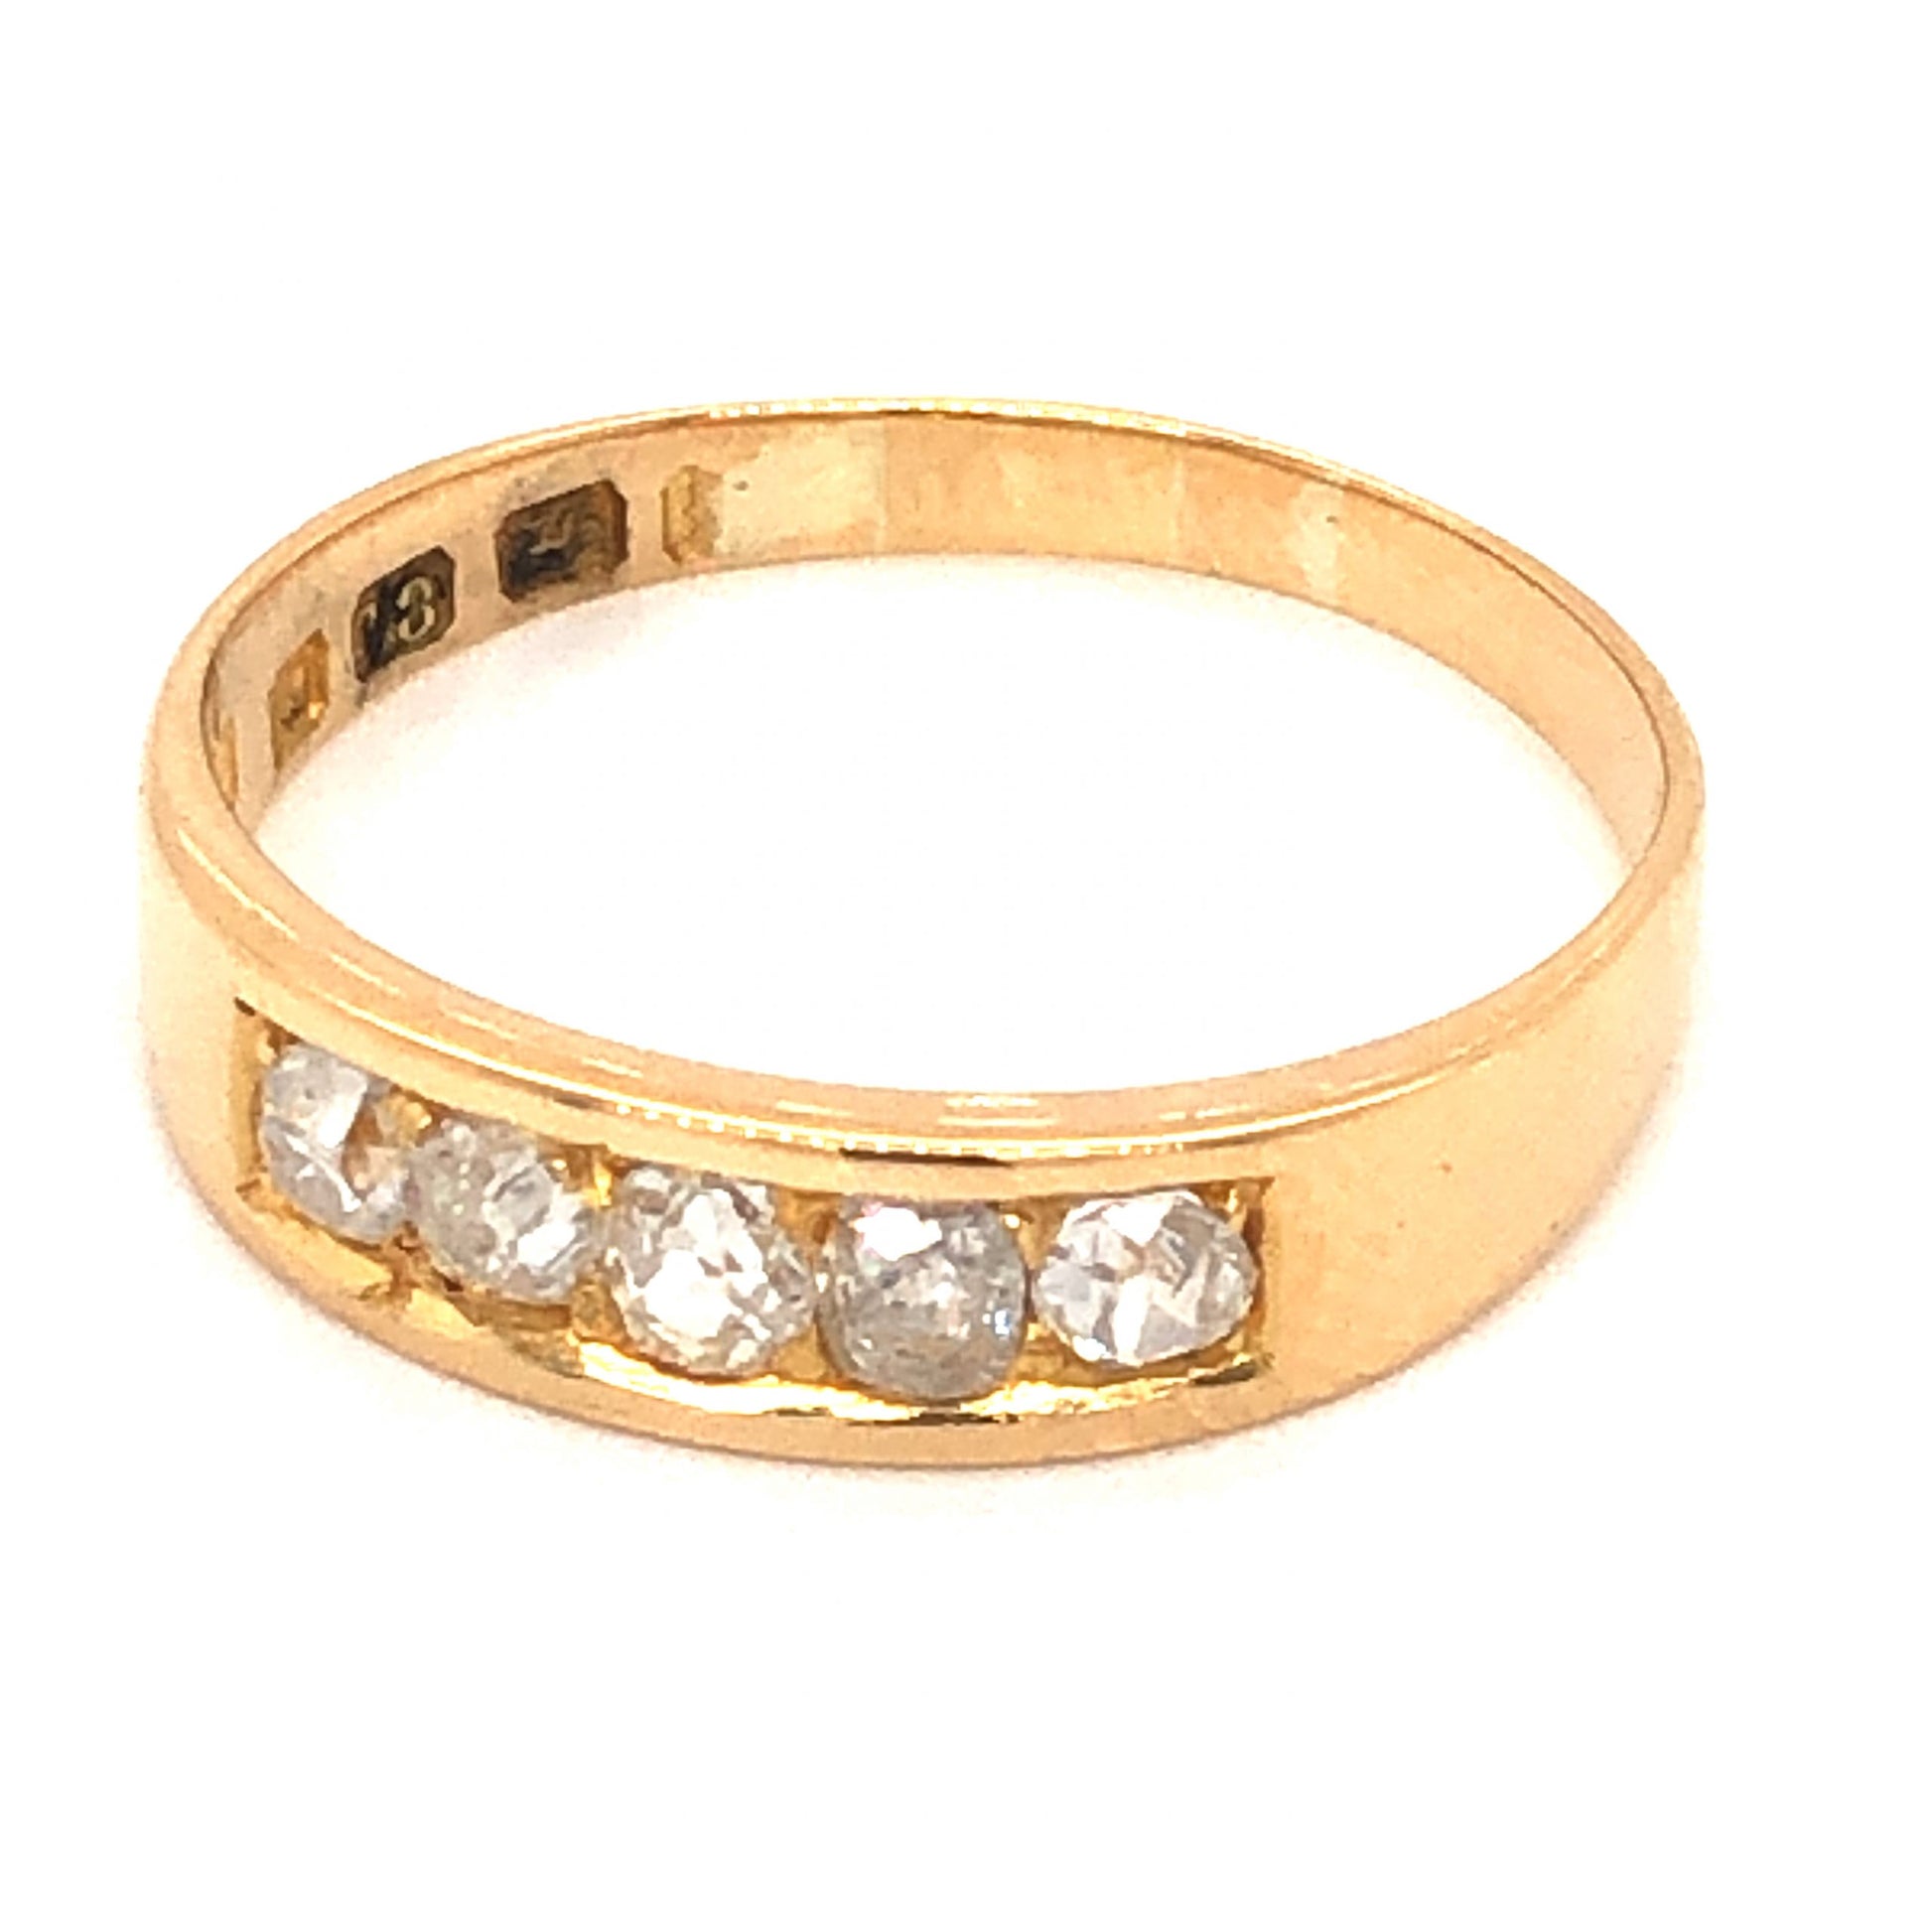 .65 Vintage Victorian Diamond Band in 18K Yellow GoldComposition: Platinum Ring Size: 7.75 Total Diamond Weight: .65ct Total Gram Weight: 2.6 g Inscription: L&L 18
      